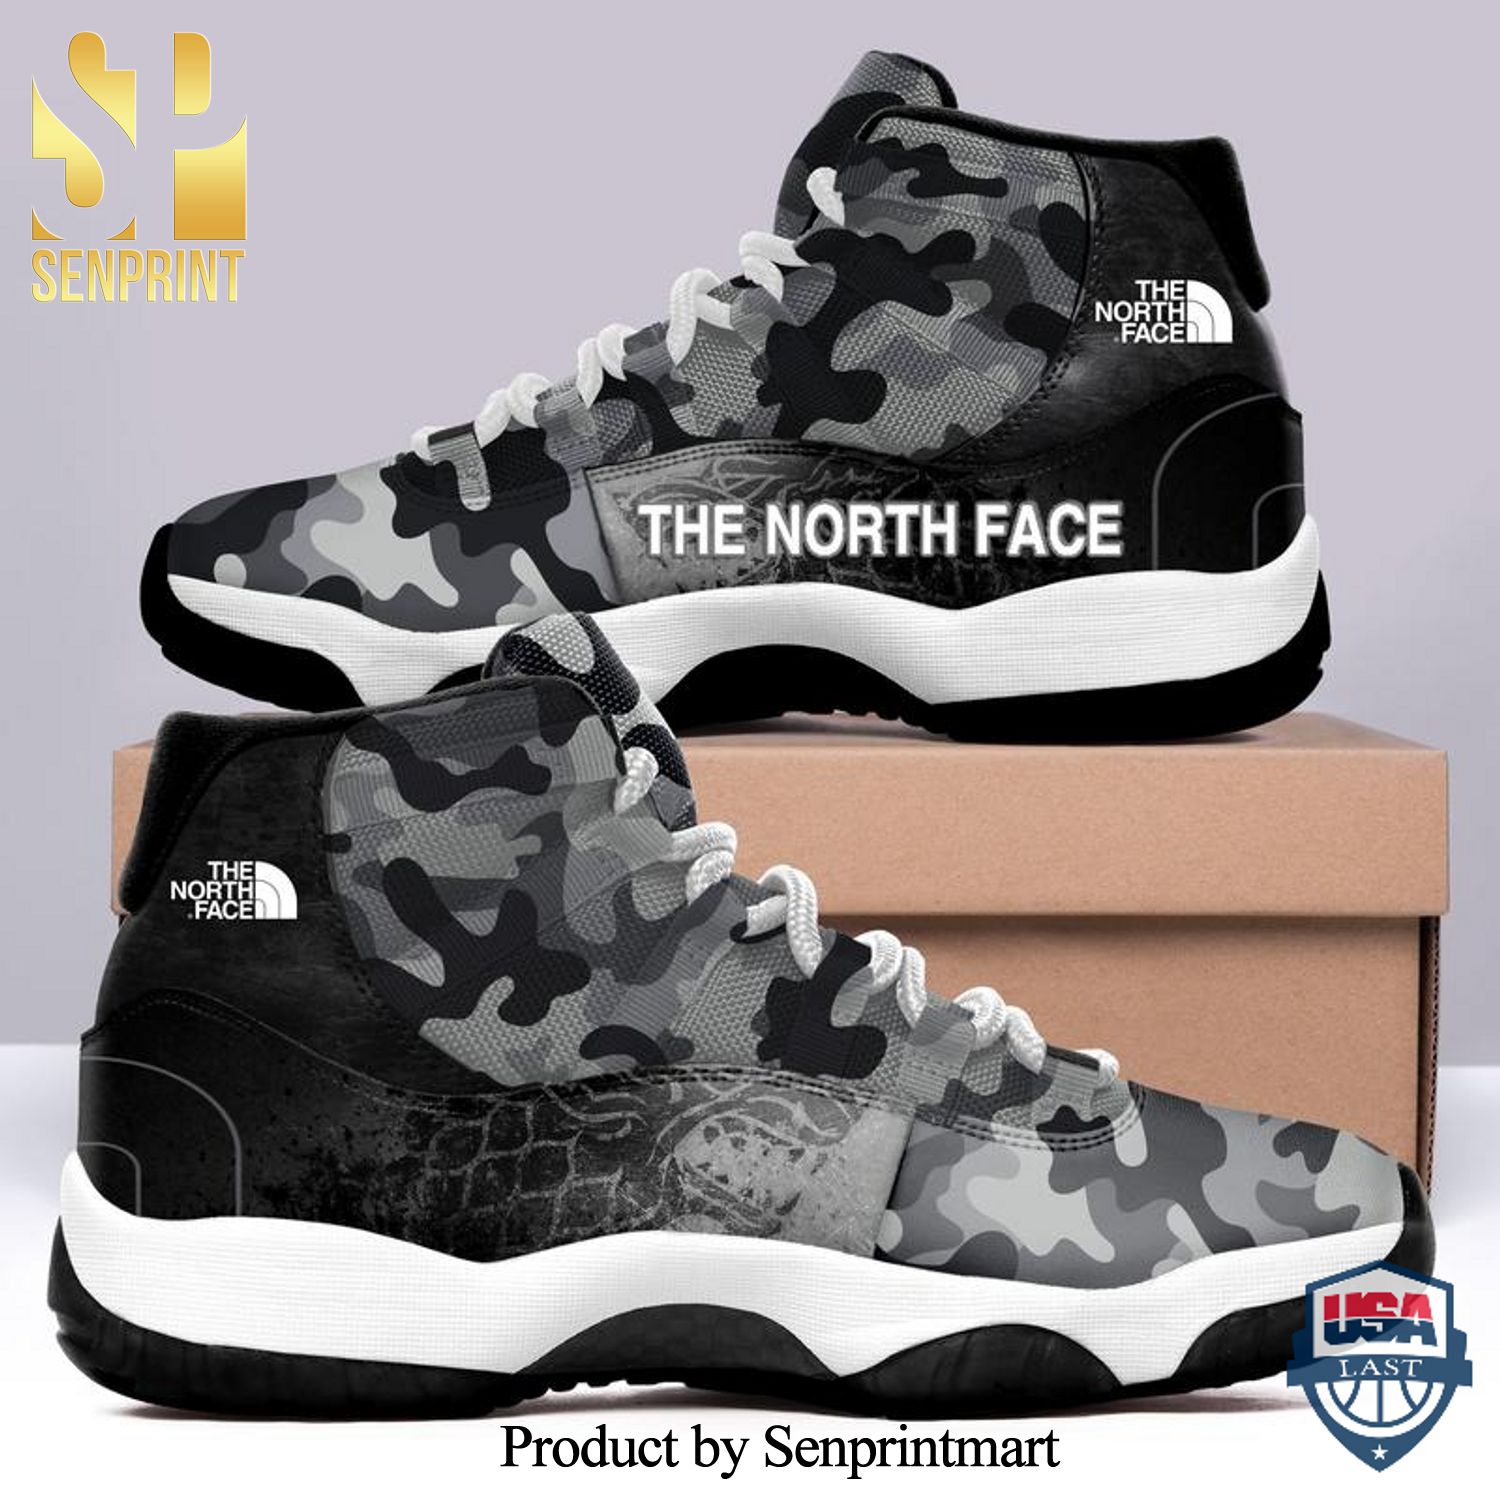 The north face camouflage Hot Fashion 3D Air Jordan 11